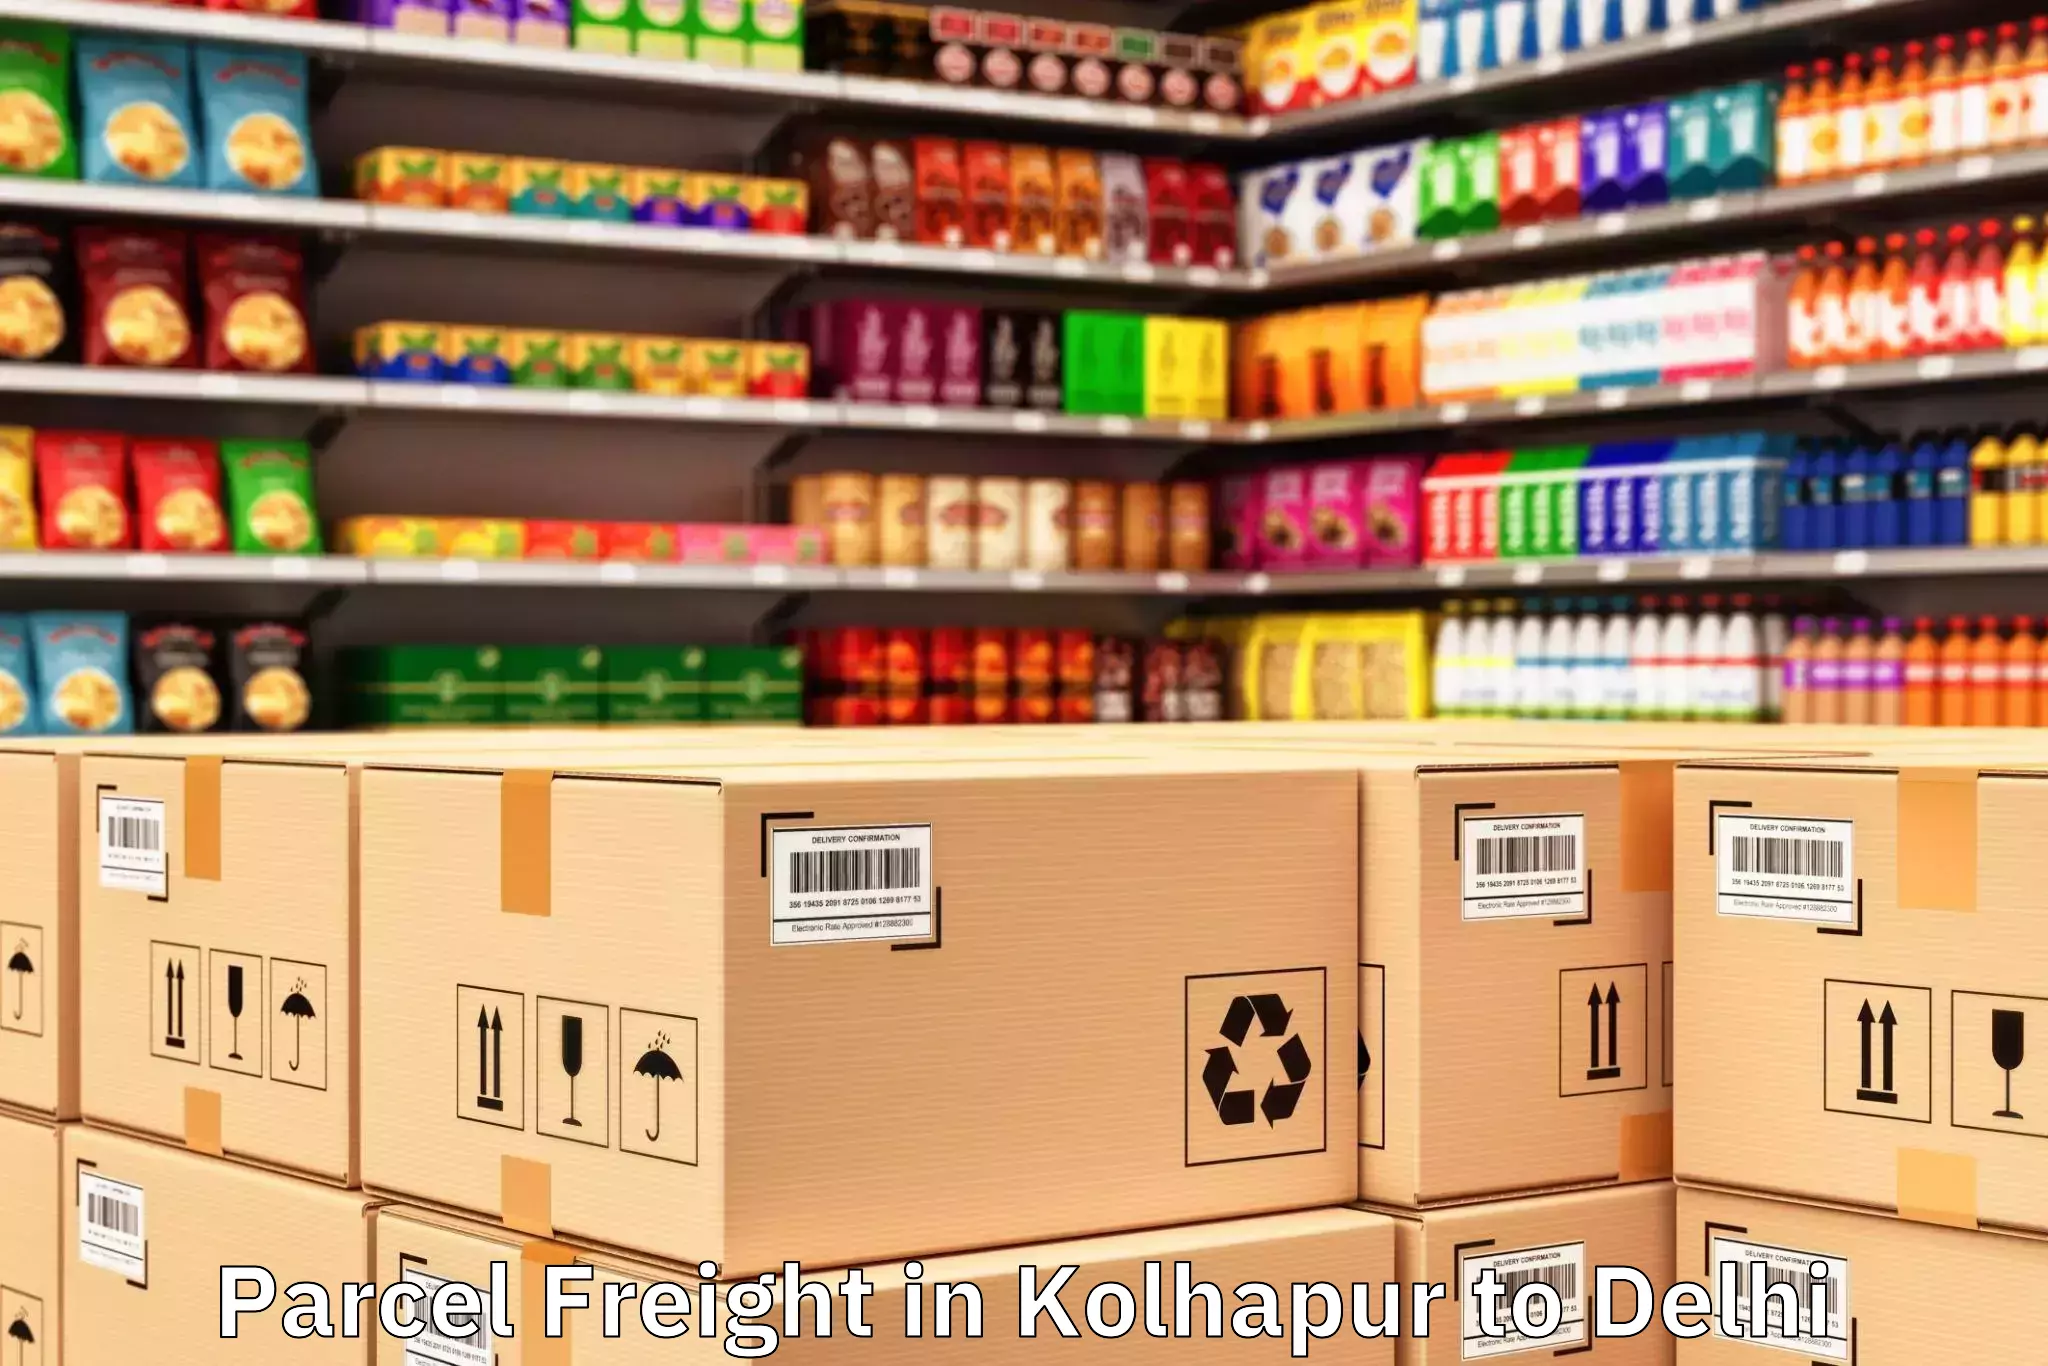 Trusted Kolhapur to Garhi Parcel Freight